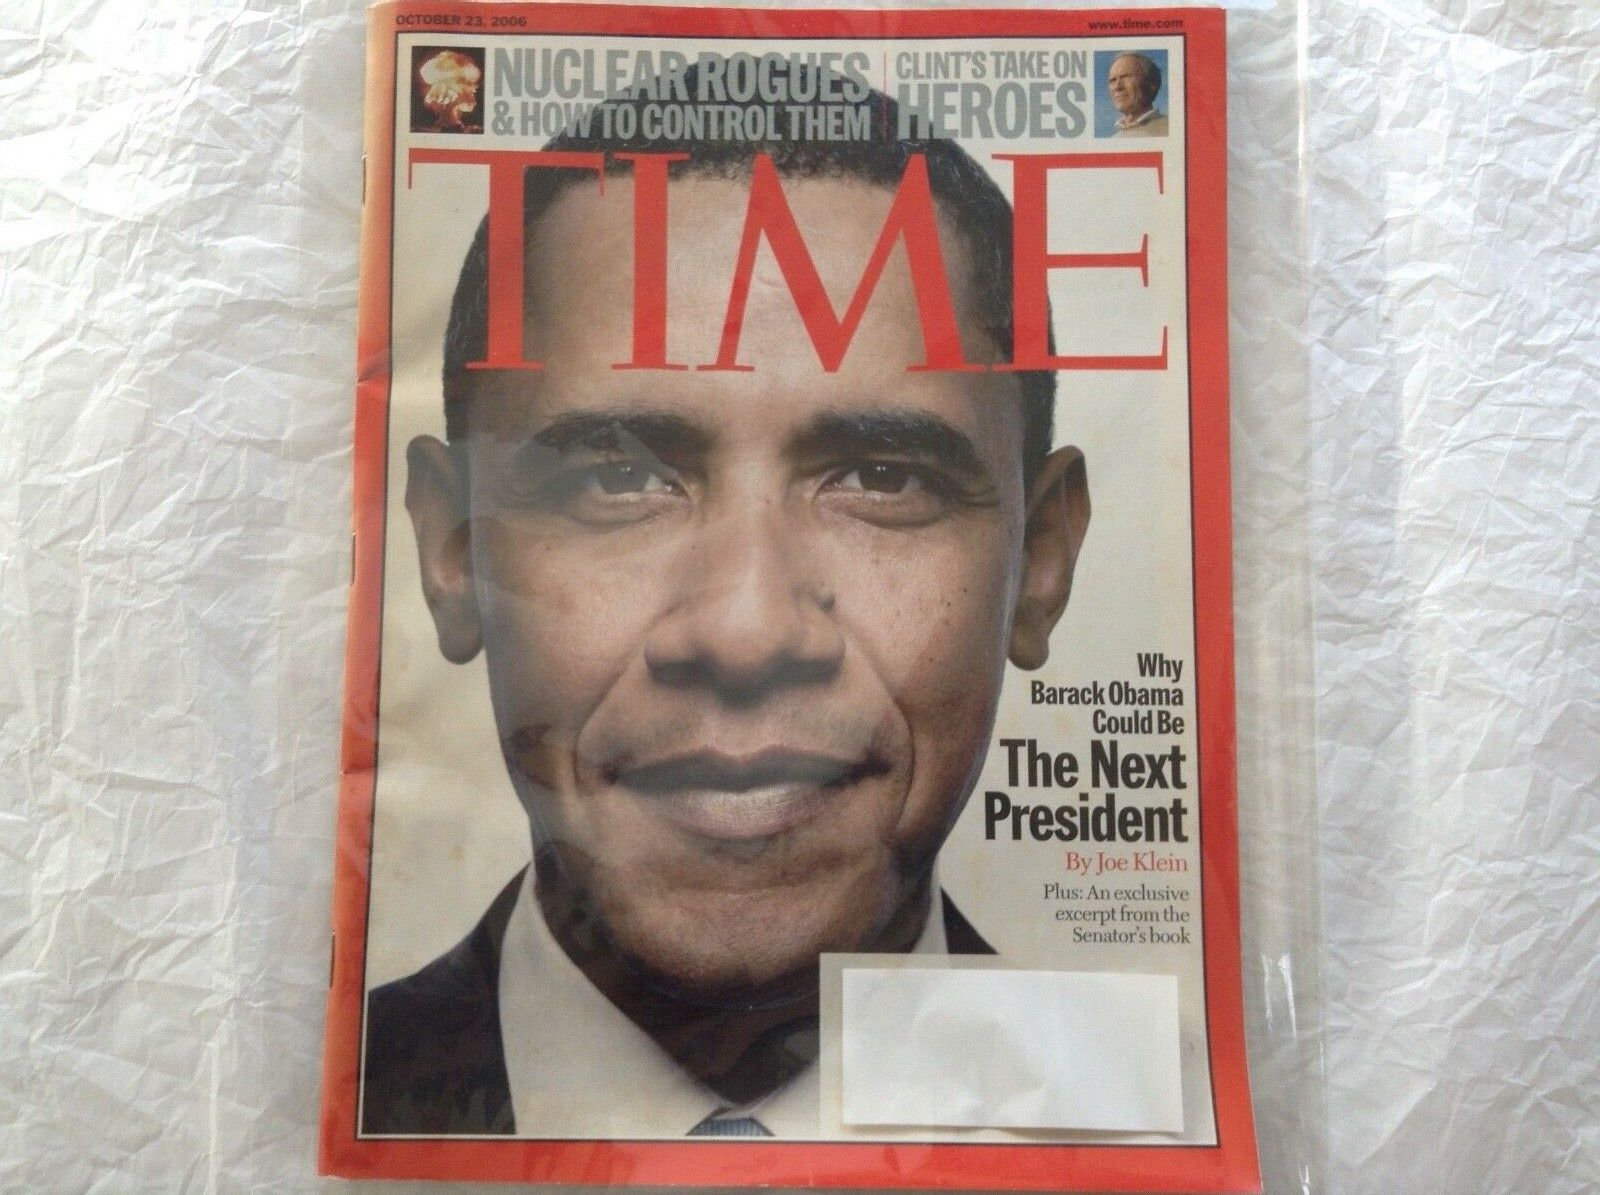 Time Magazine October 23, 2006 “Why Barack Obama Could Be The Next President